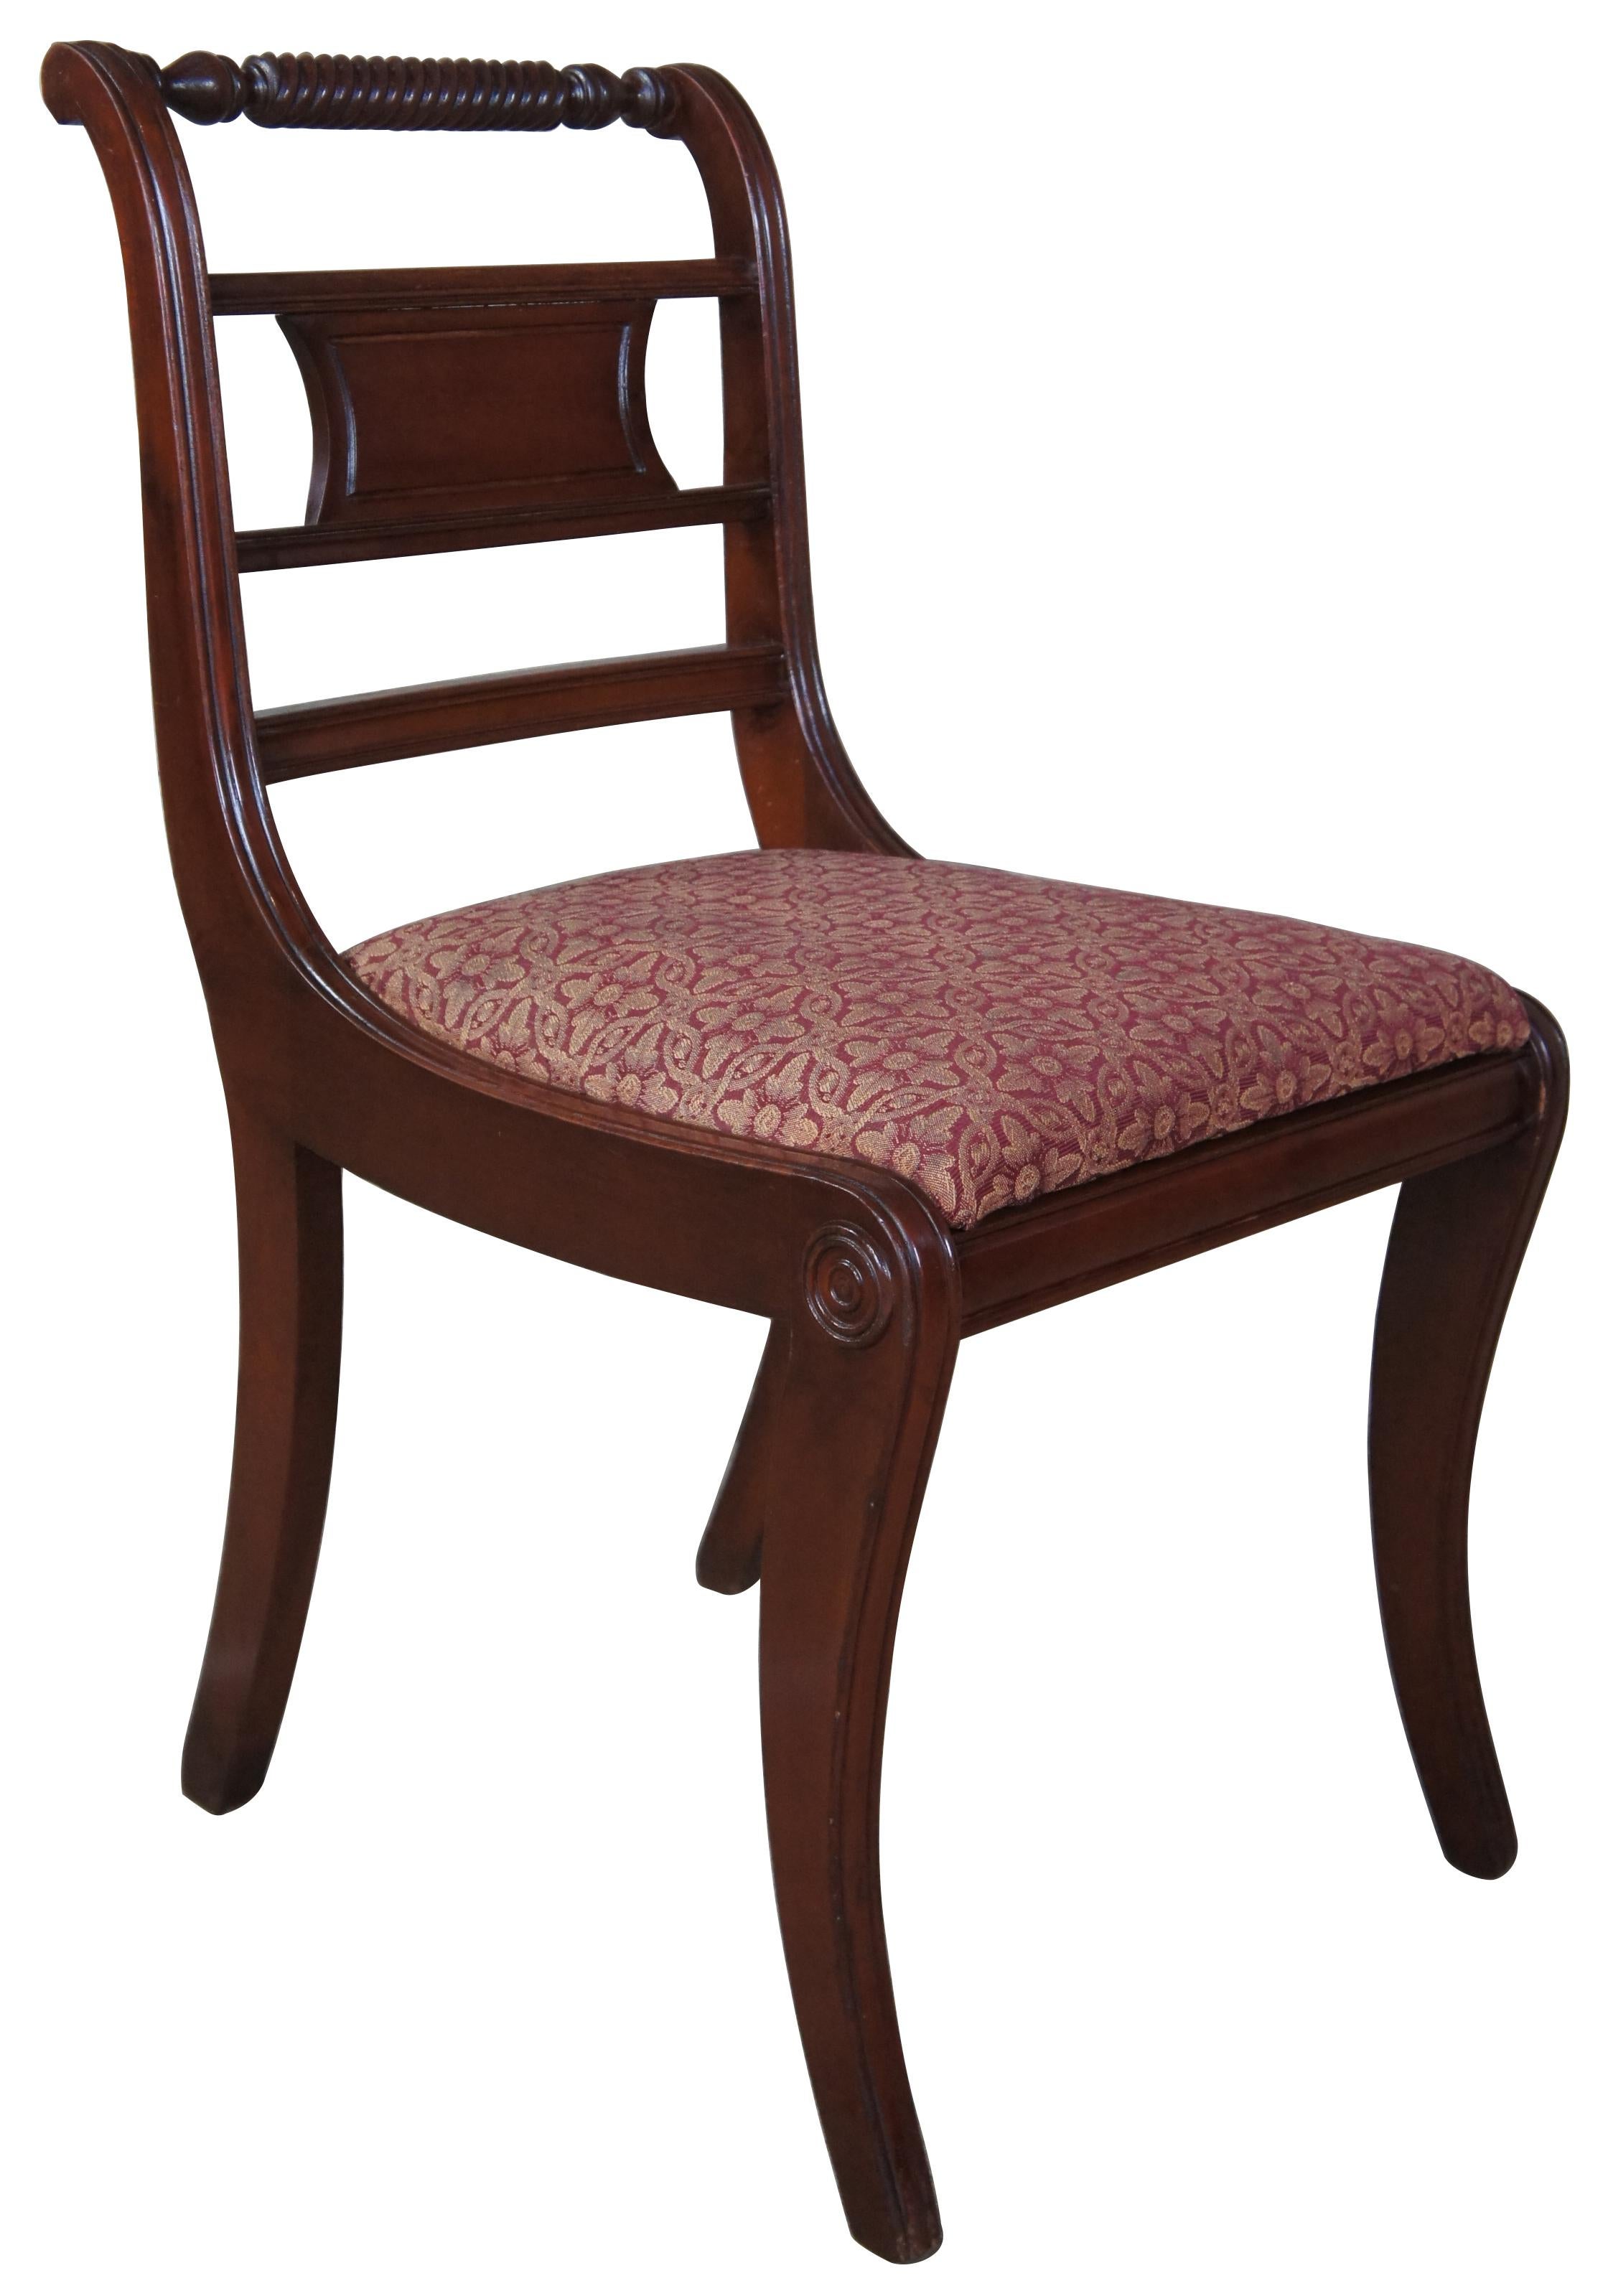 mahogany chairs for sale